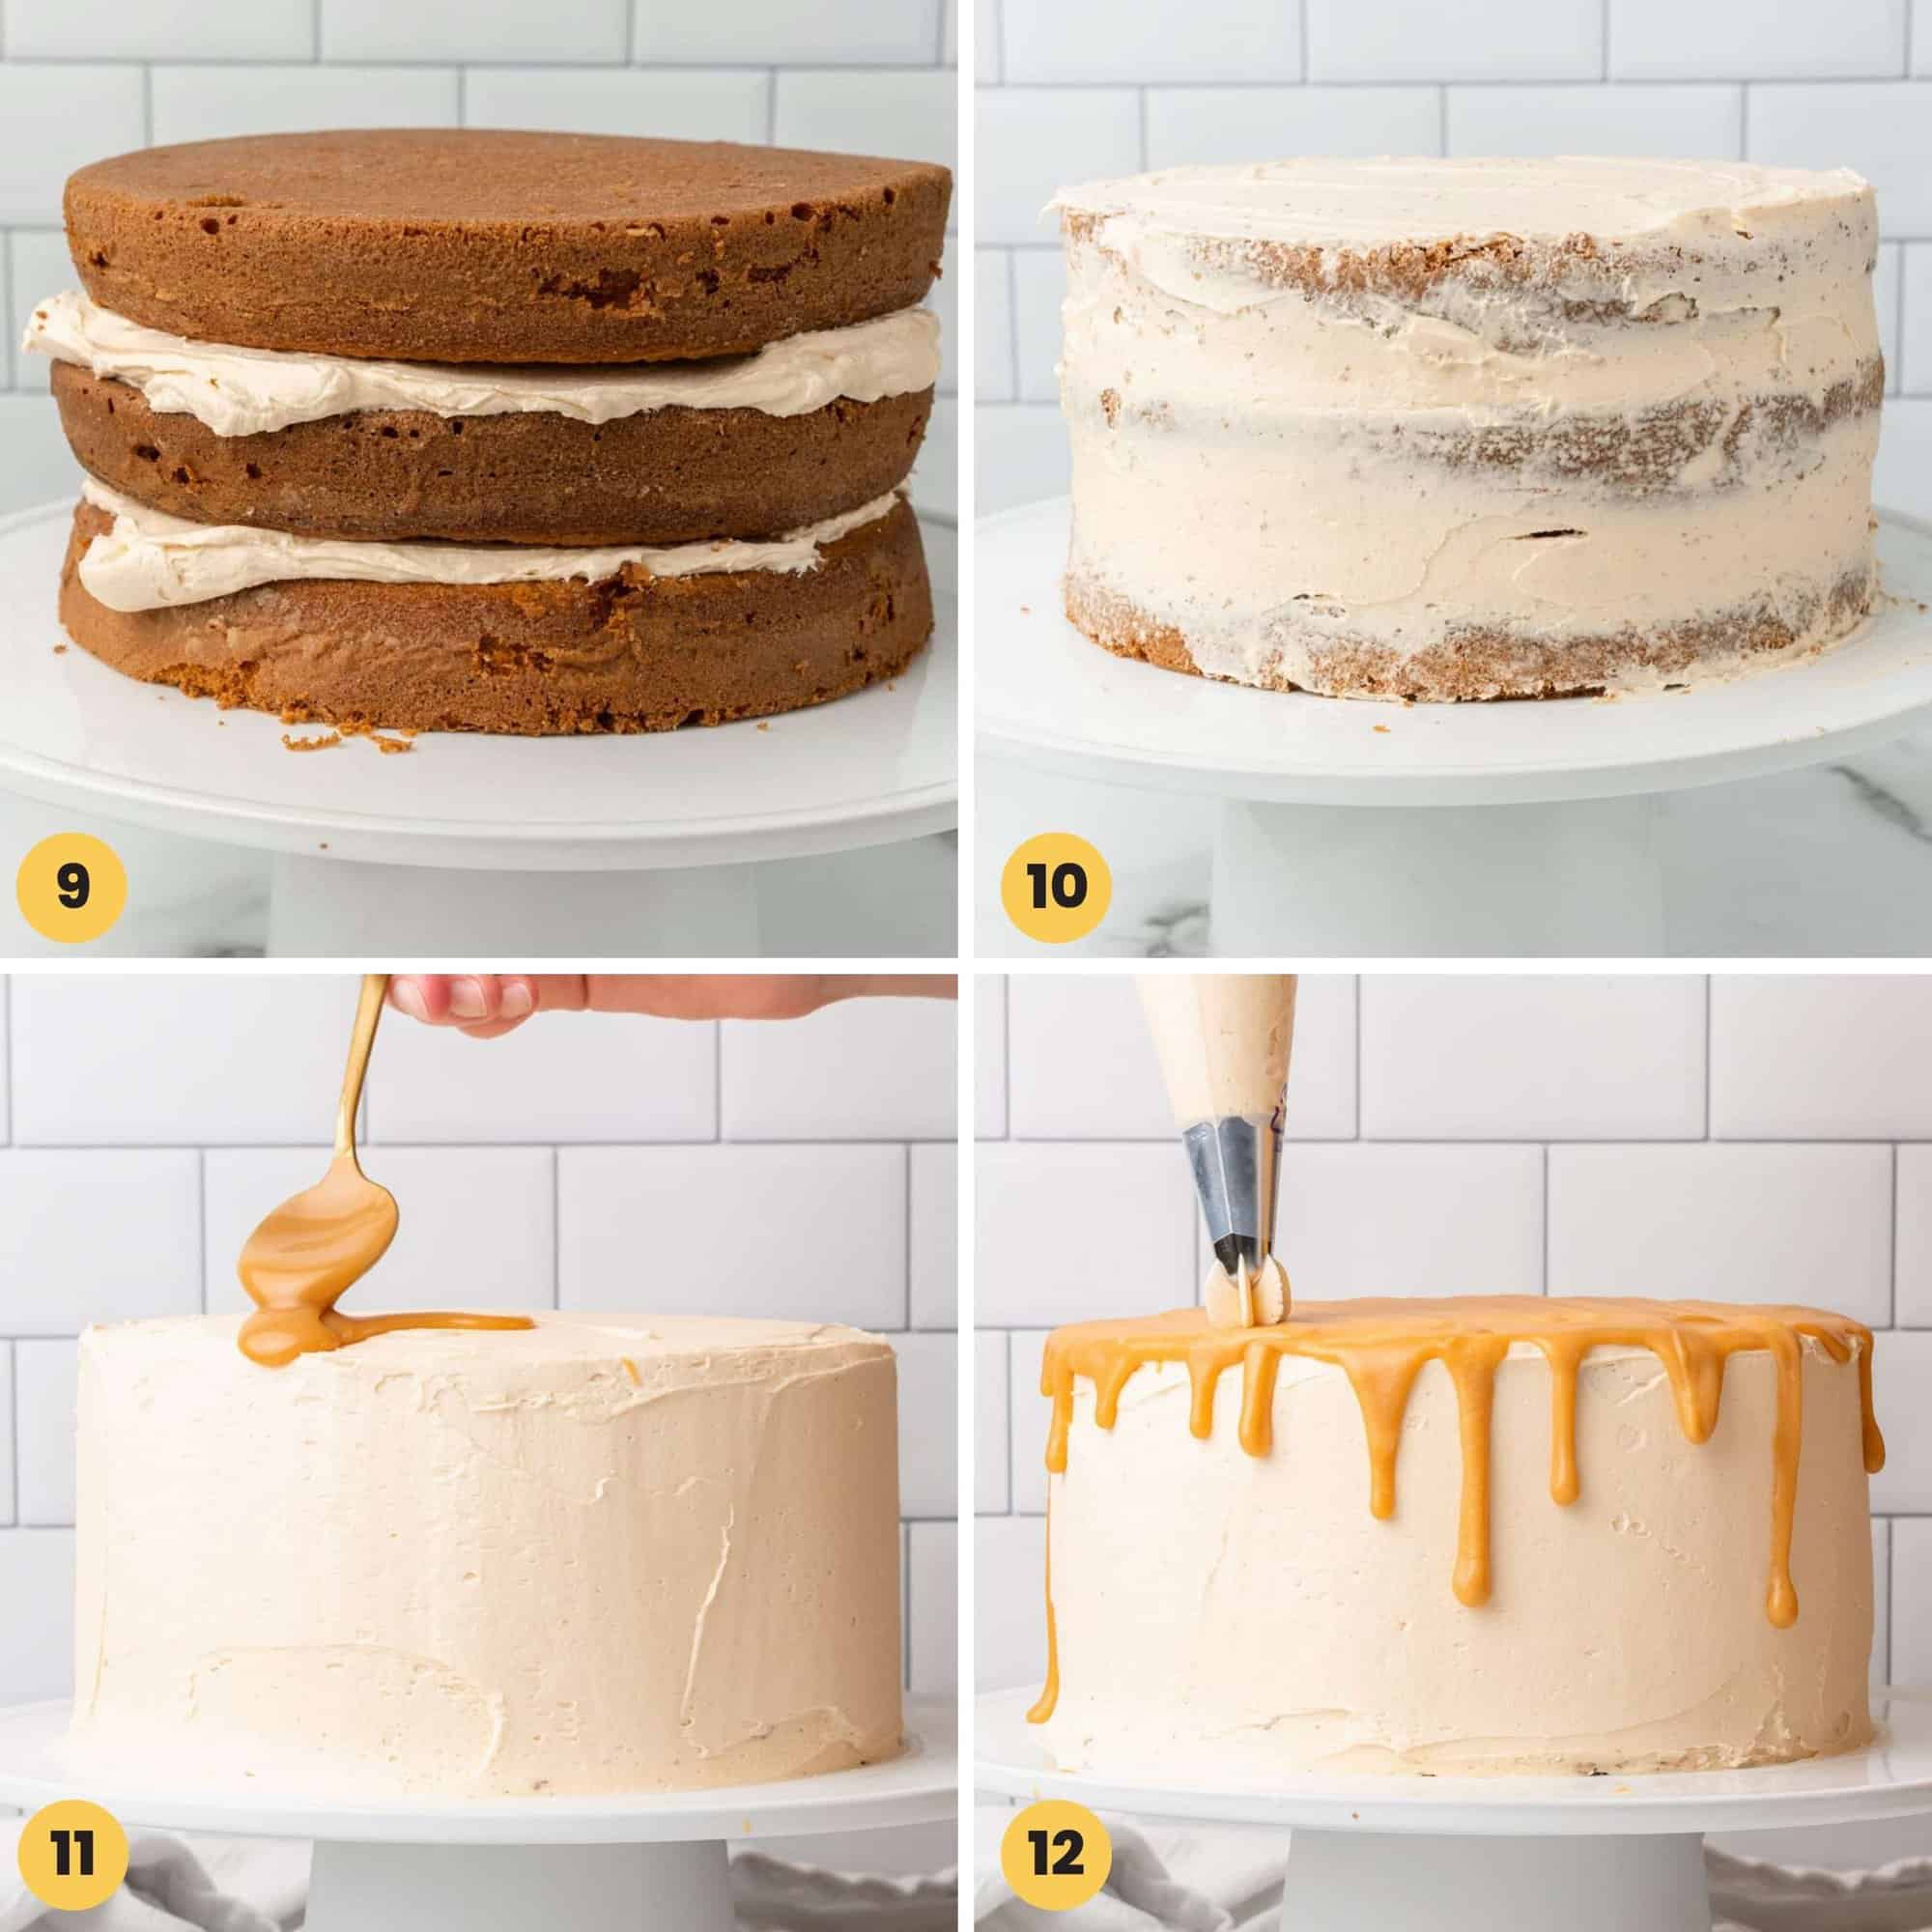 Four photos showing how to layer, frost, and decorate a butterscotch cake with frosting and butterscotch ganache